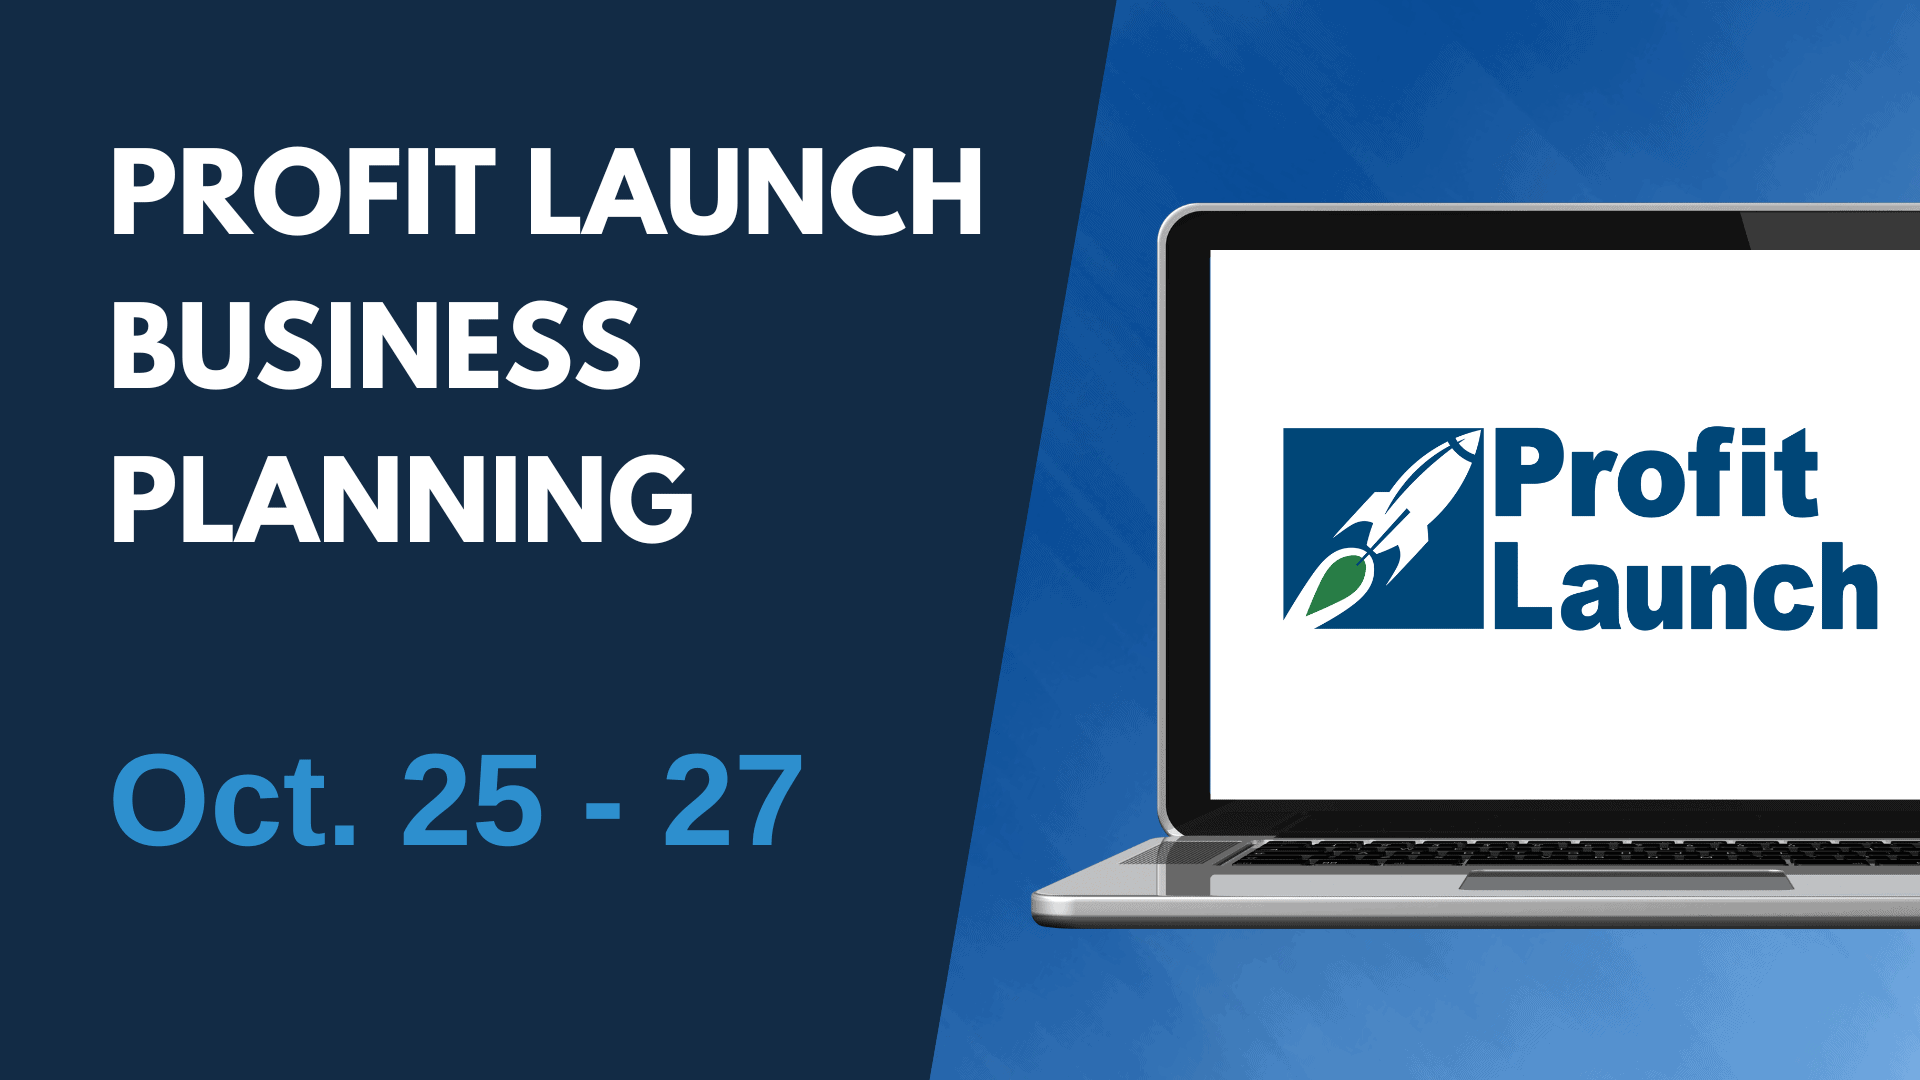 Profit Launch Business Planning - October 25 to 27